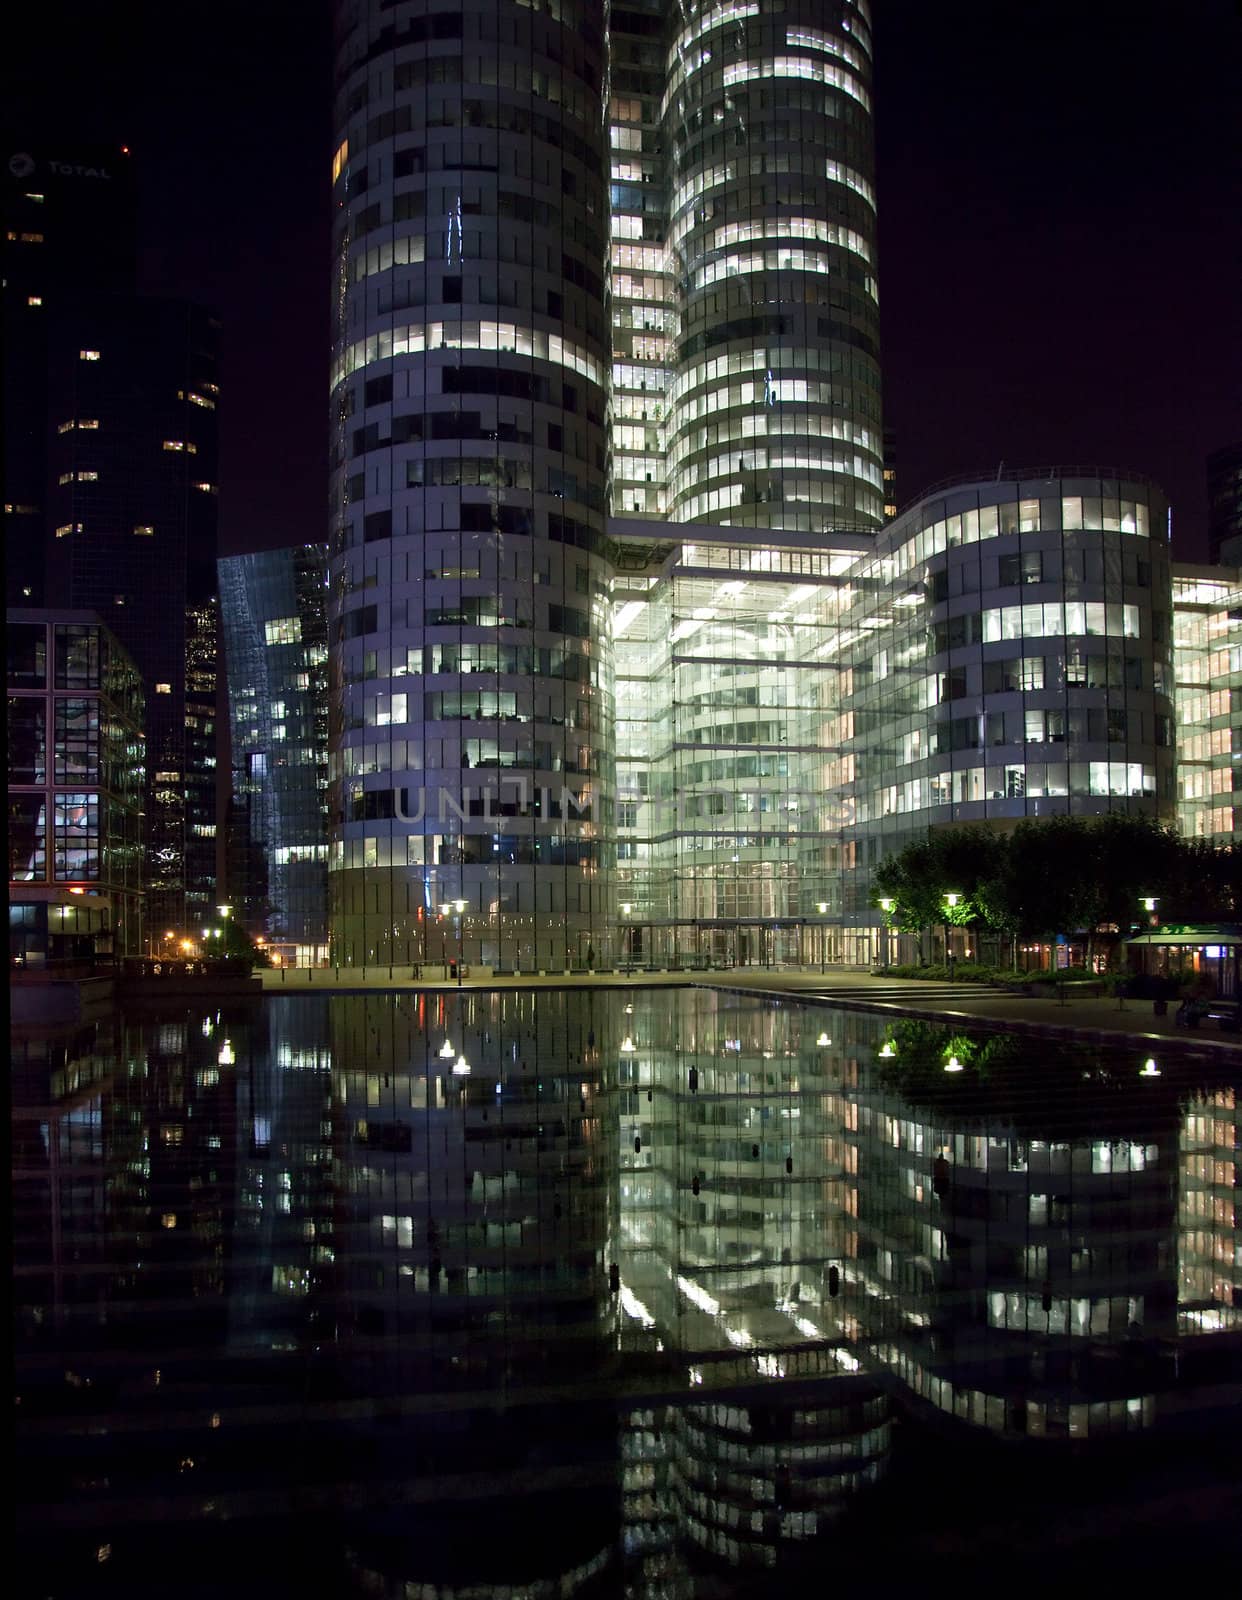 Reflection of La Defense Office buildings at night by steheap